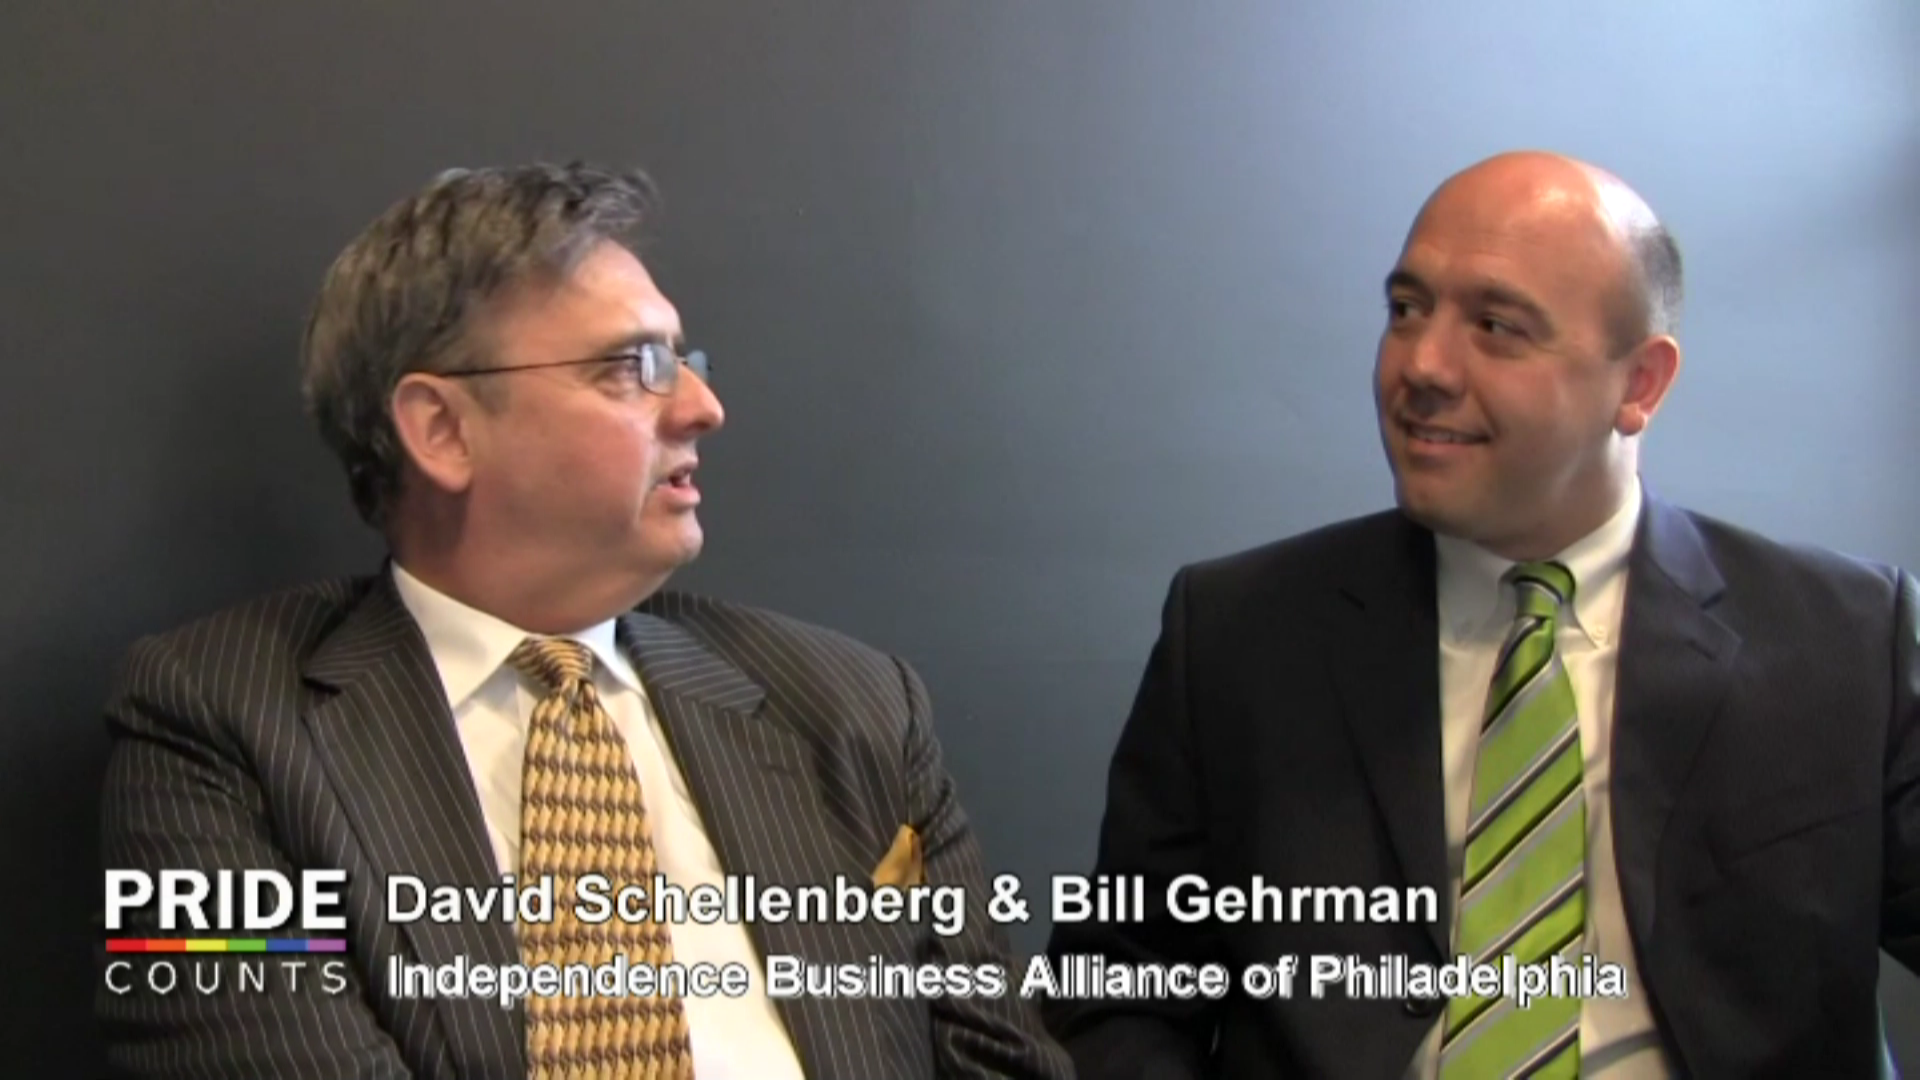 Independence Business Alliance of Philadelphia Discusses the LGBTQ Community